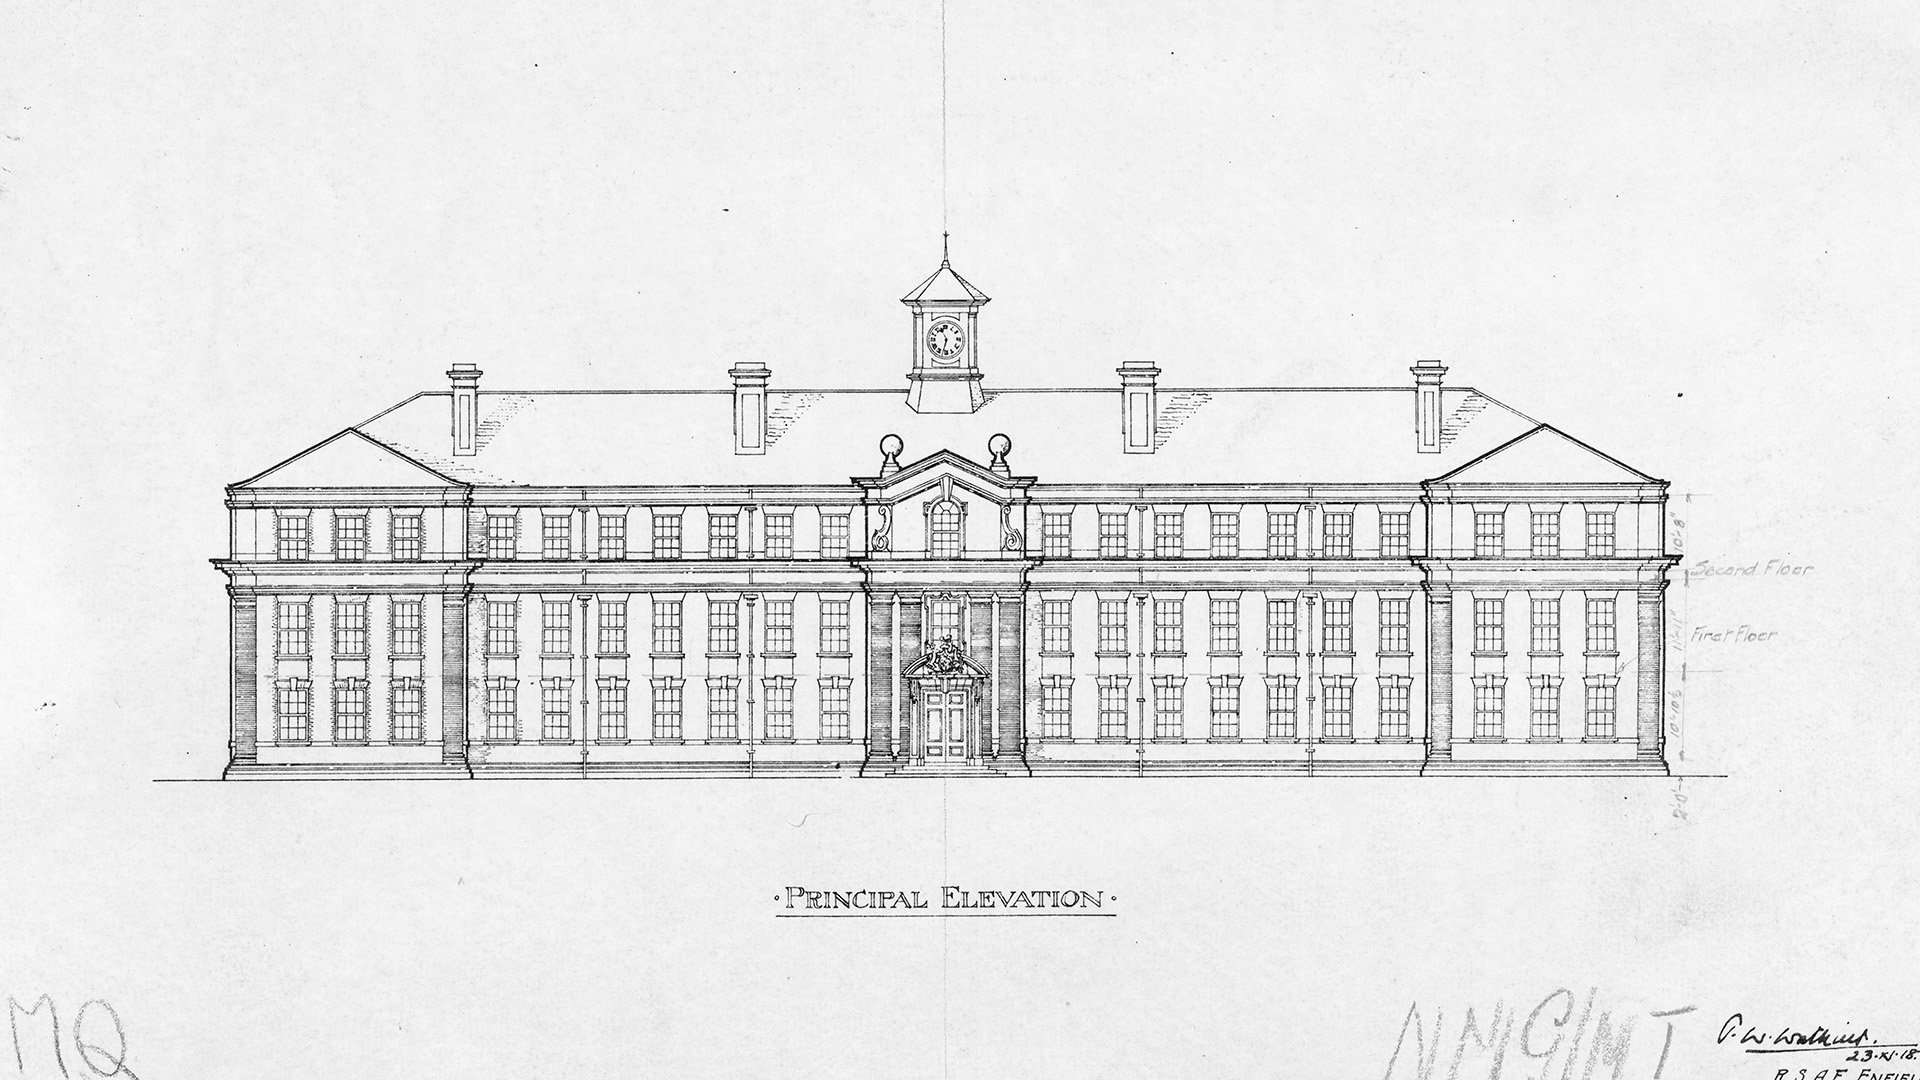 National Machine Gun Factory, Burton on Trent, Staffordshire, architect’s drawing showing the grand, three storey headquarters building, Listed Grade II.